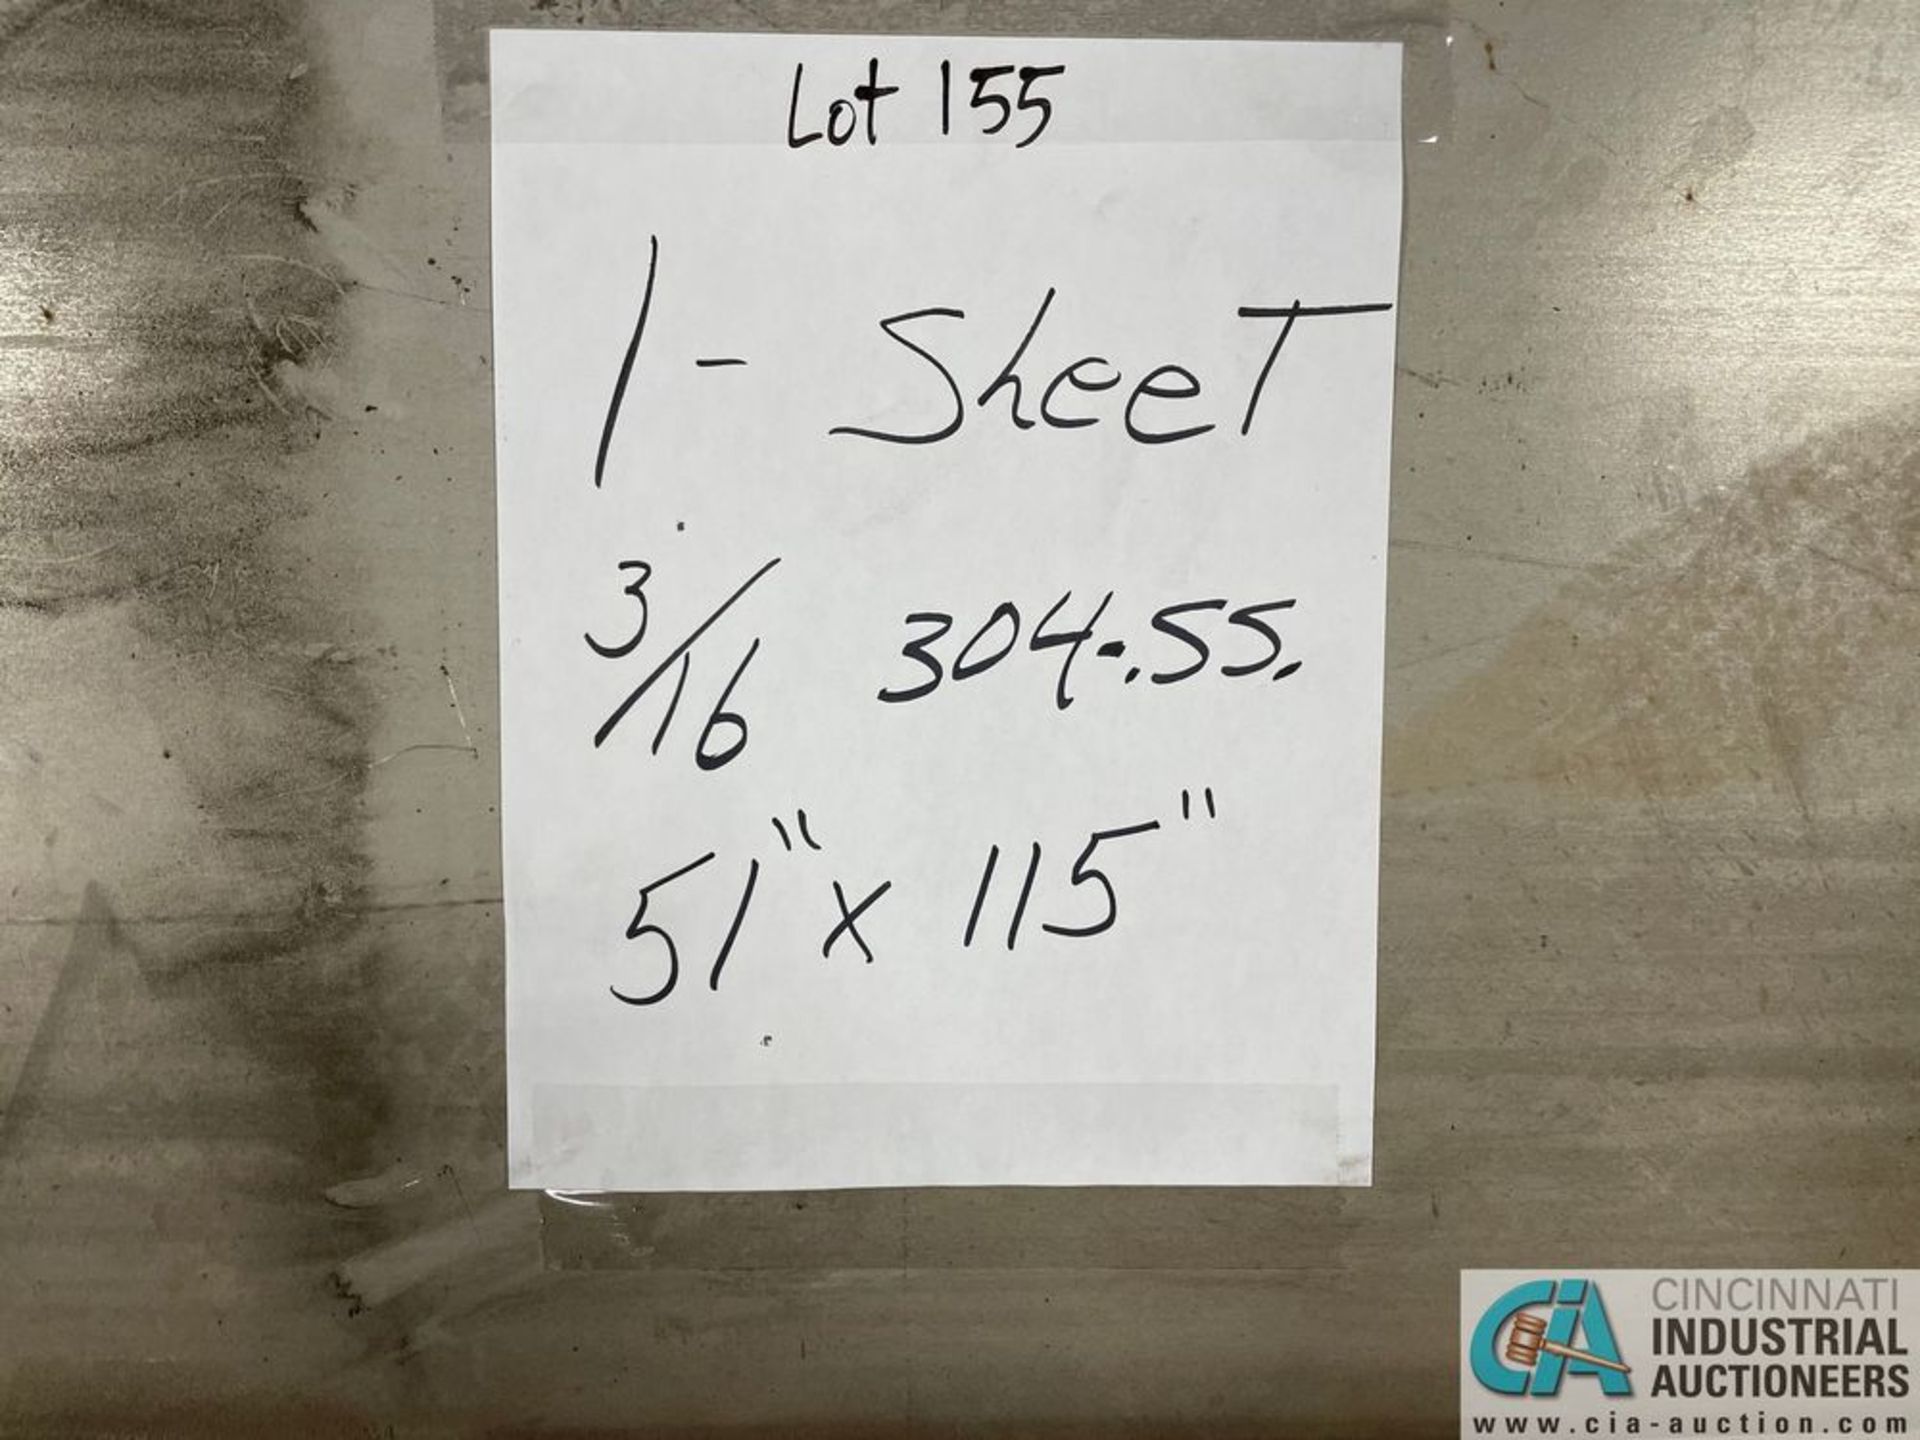 (LOT) (2) SHEETS (1 - FULL & 1 - PARTIAL) 3/16" THICK X 51" X 115" 304 STAINLESS STEEL - Image 3 of 3